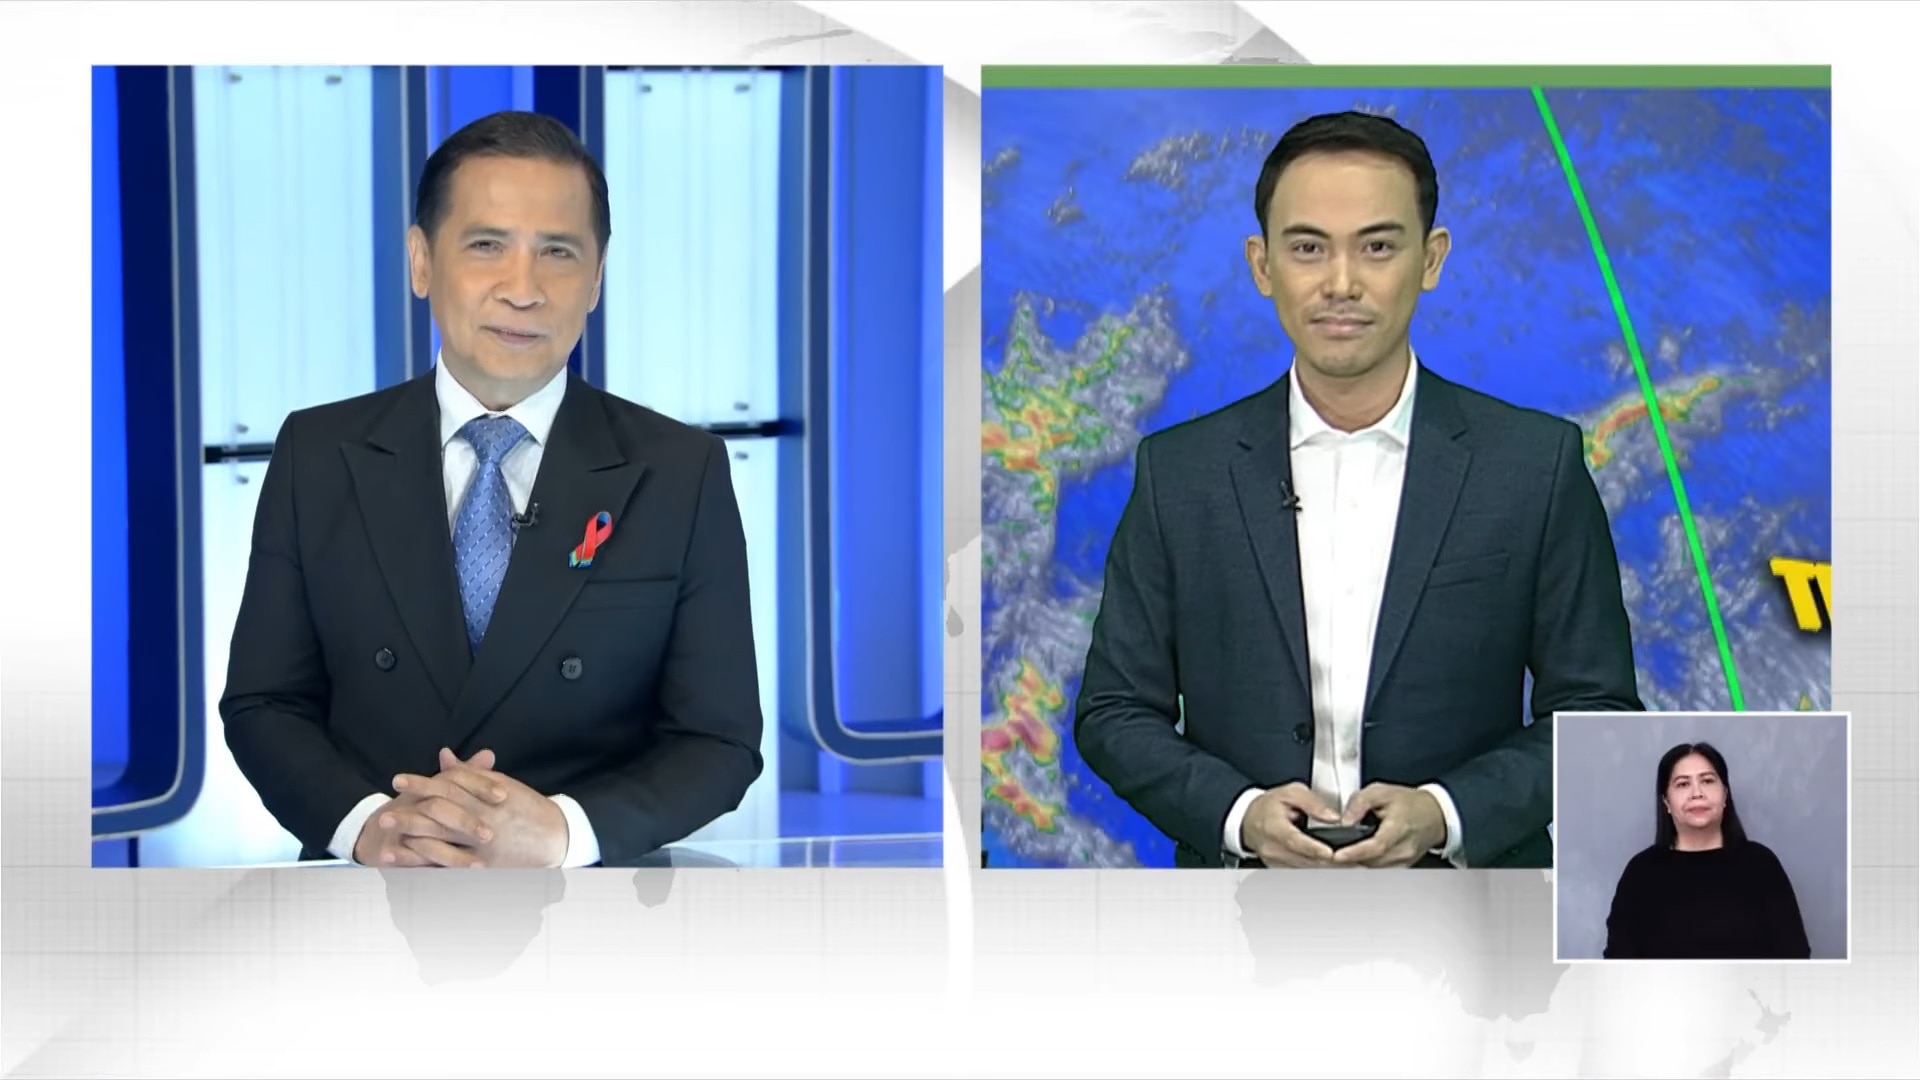 "TV Patrol" introduces new weatherman and resident ABSCBN News